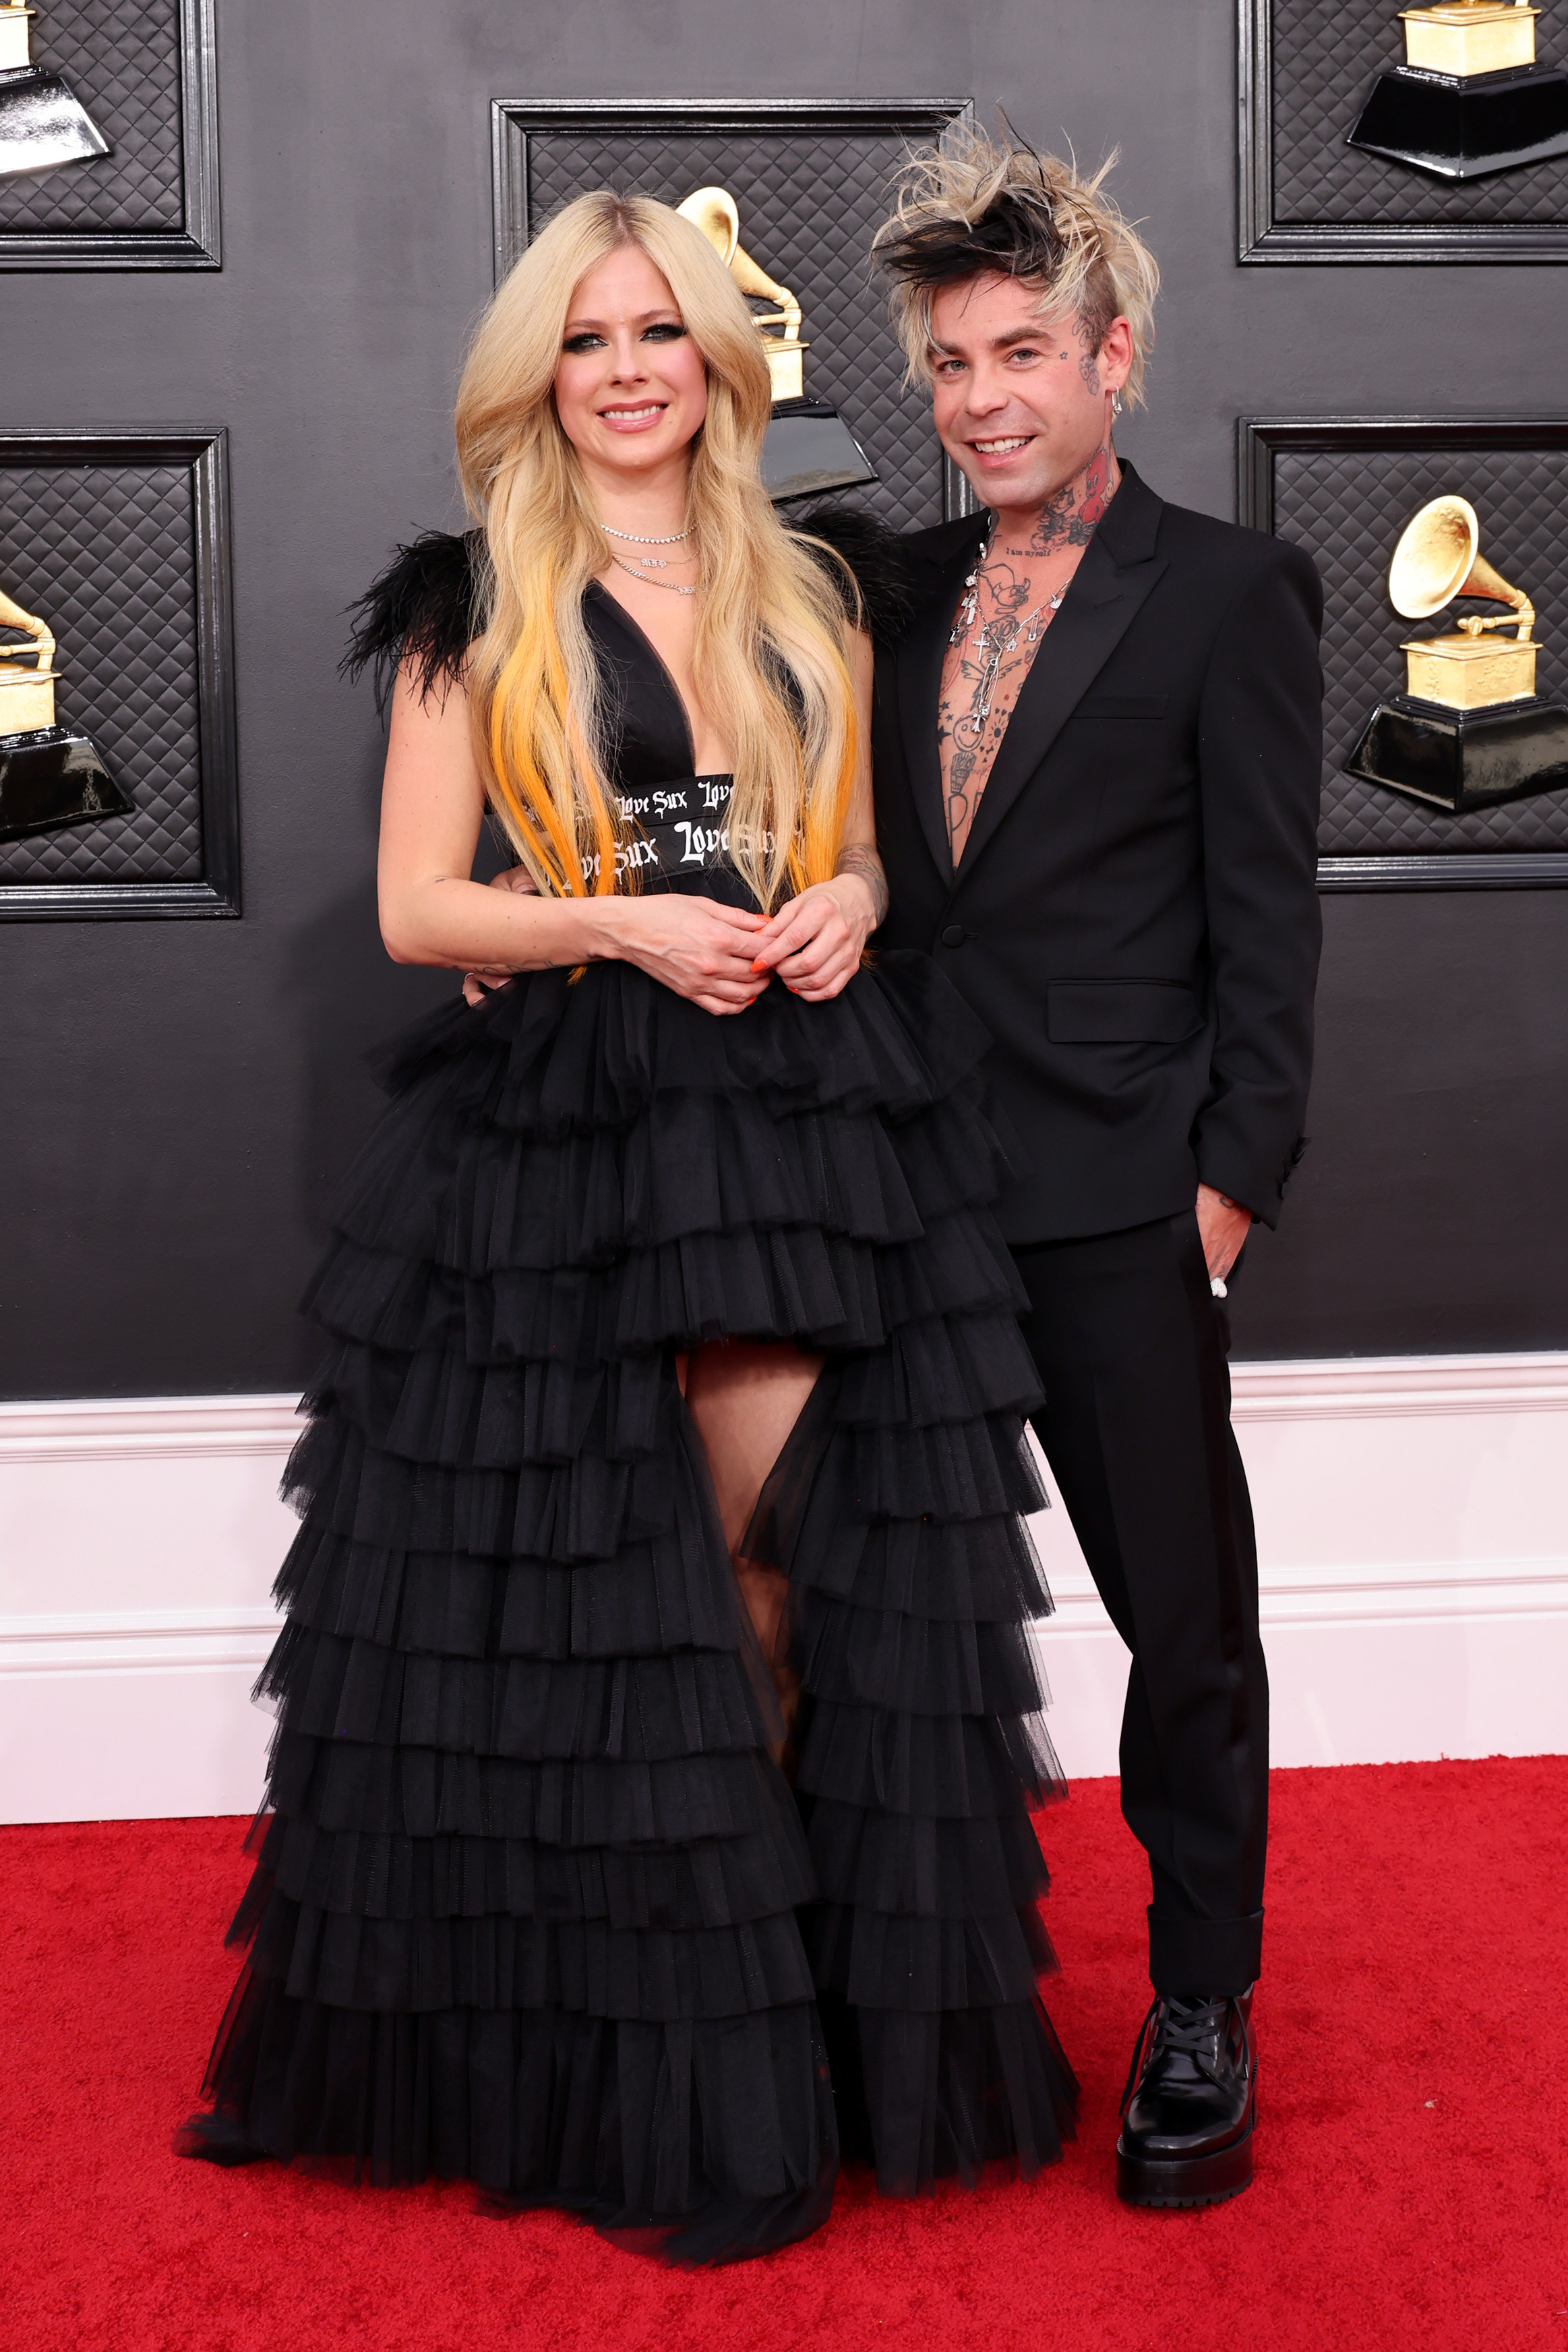 Avril Lavigne and Mod Sun on the red carpet